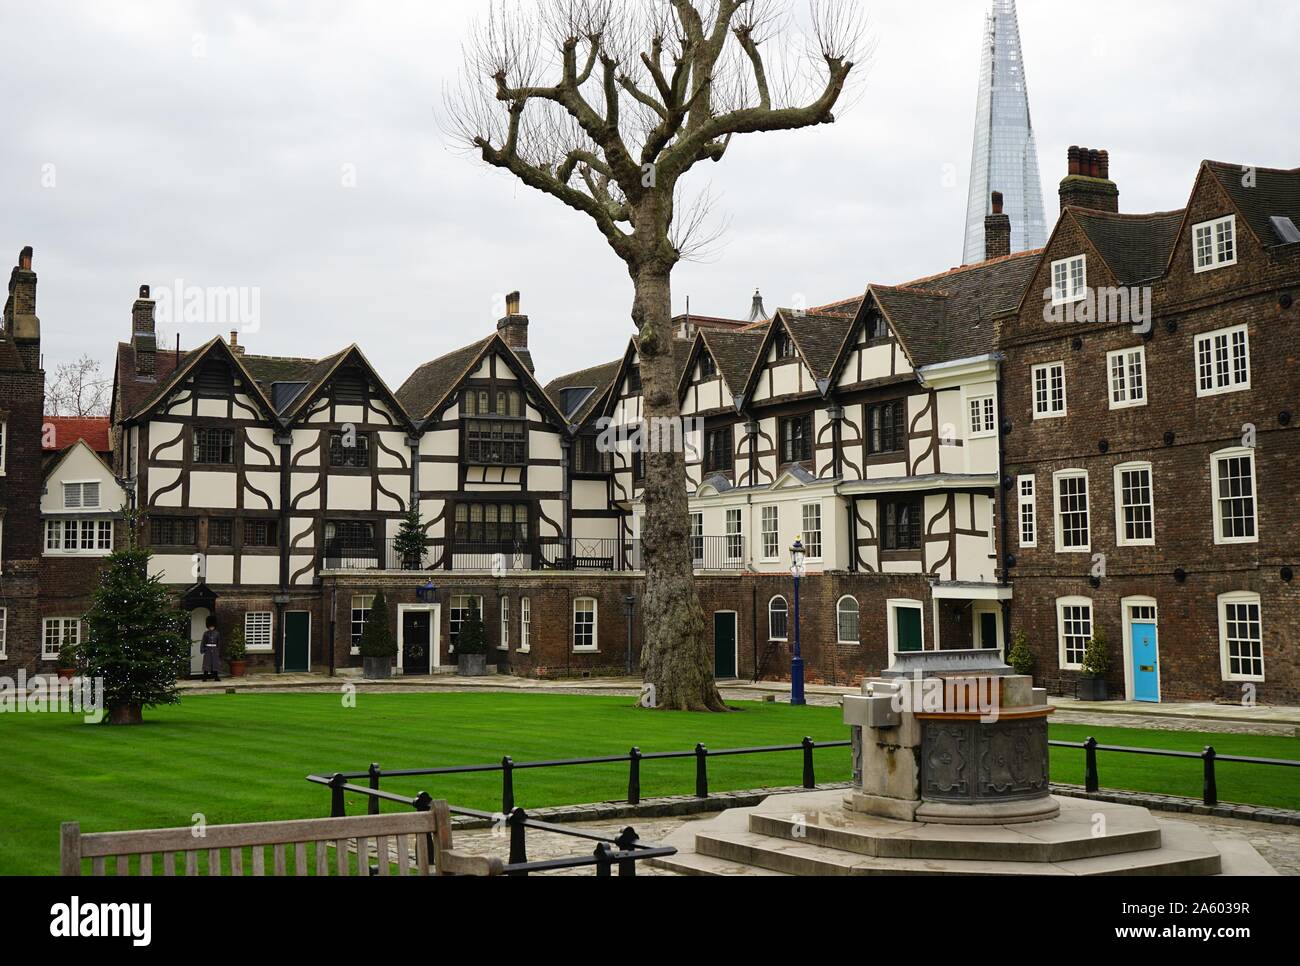 Views around the Tower of London, a historic castle located on the north bank of the River Thames in central London. Completed in the 14th Century. From the 12th Century until the 20th Century the castle was used as a prison. Dated 2015 Stock Photo